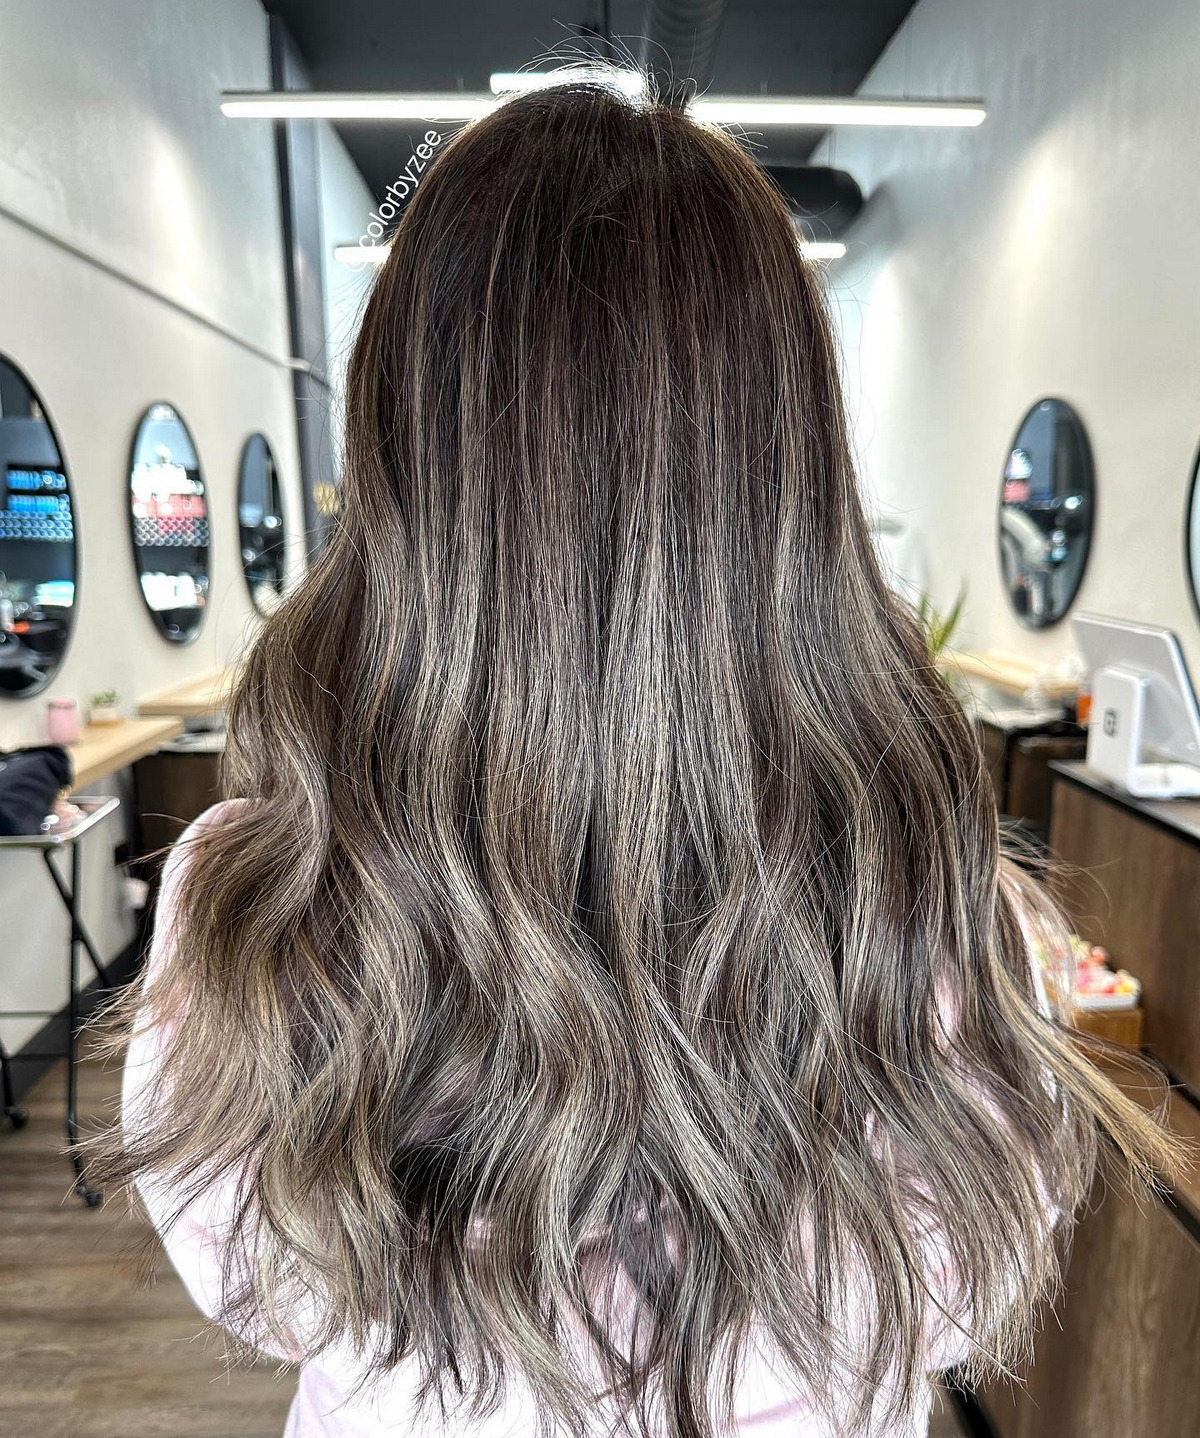 45 Partial Balayage Hairstyle Ideas to Try in 2023 - Hood MWR